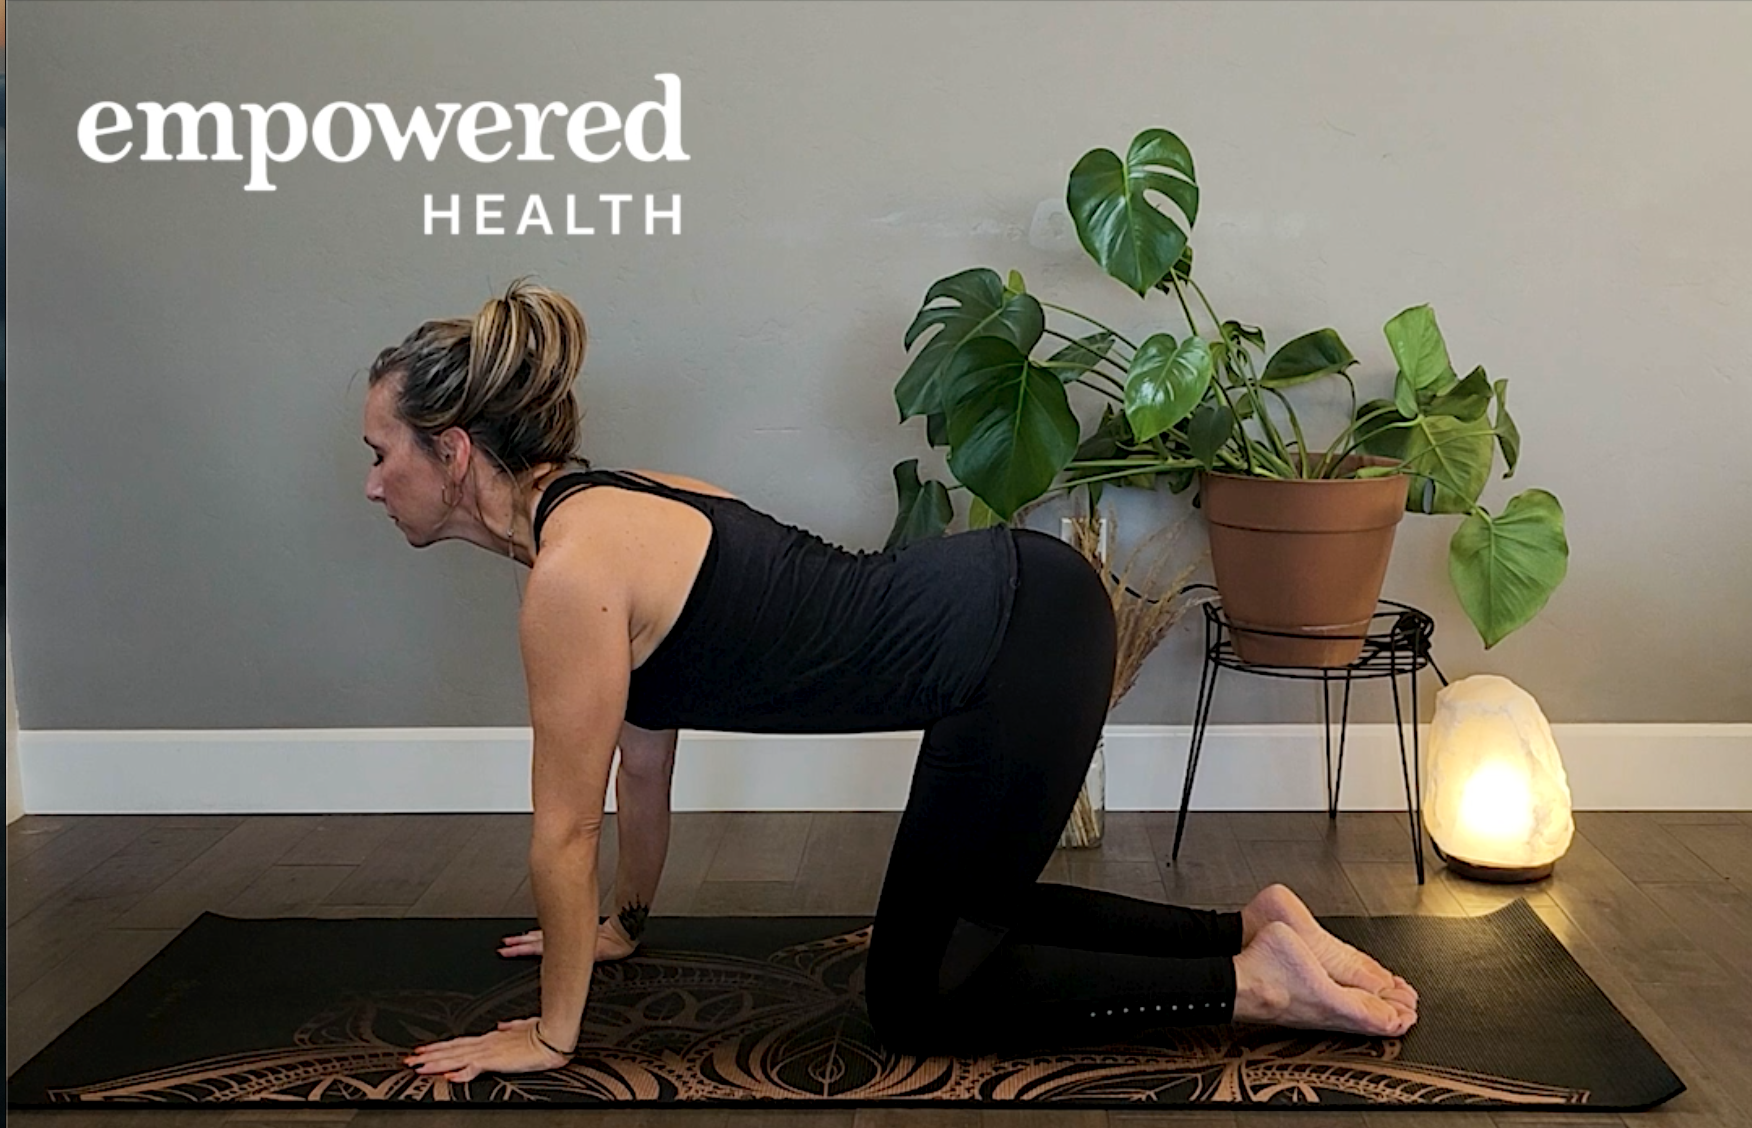 Yoga after eating: 5 yoga poses to practice after overeating | HealthShots